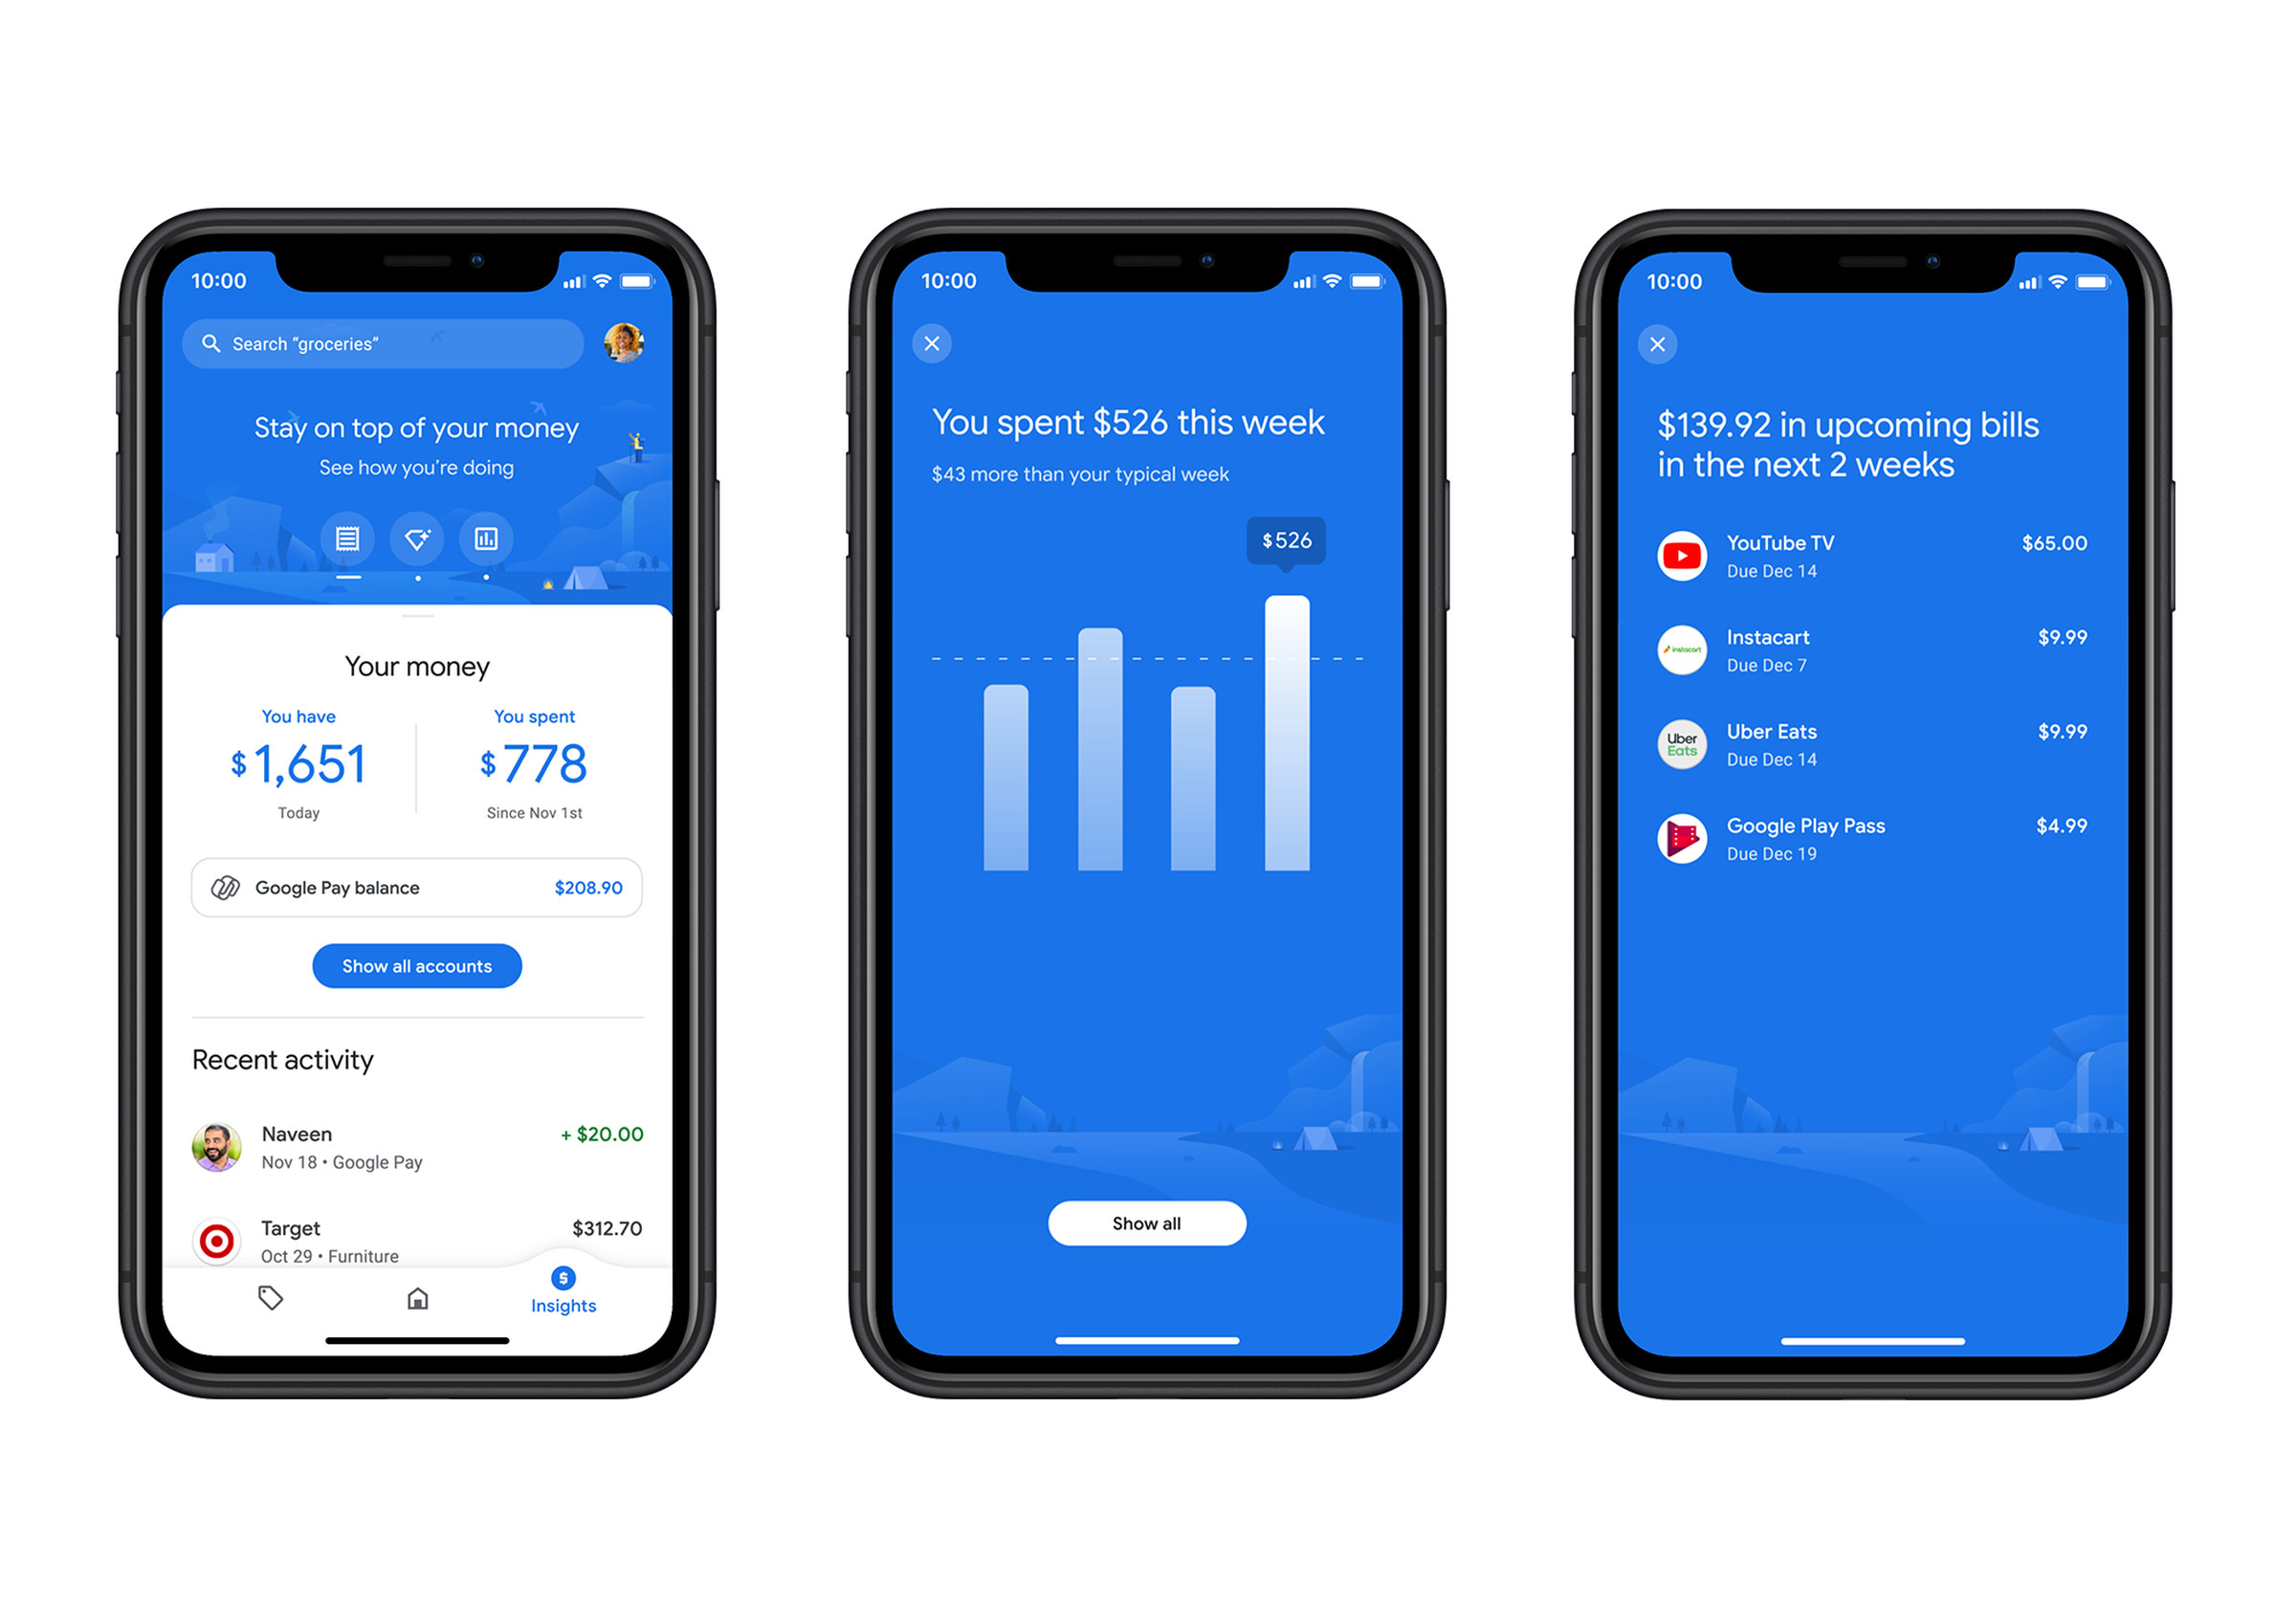 You can connect Google Pay to your bank to track your spending across multiple accounts